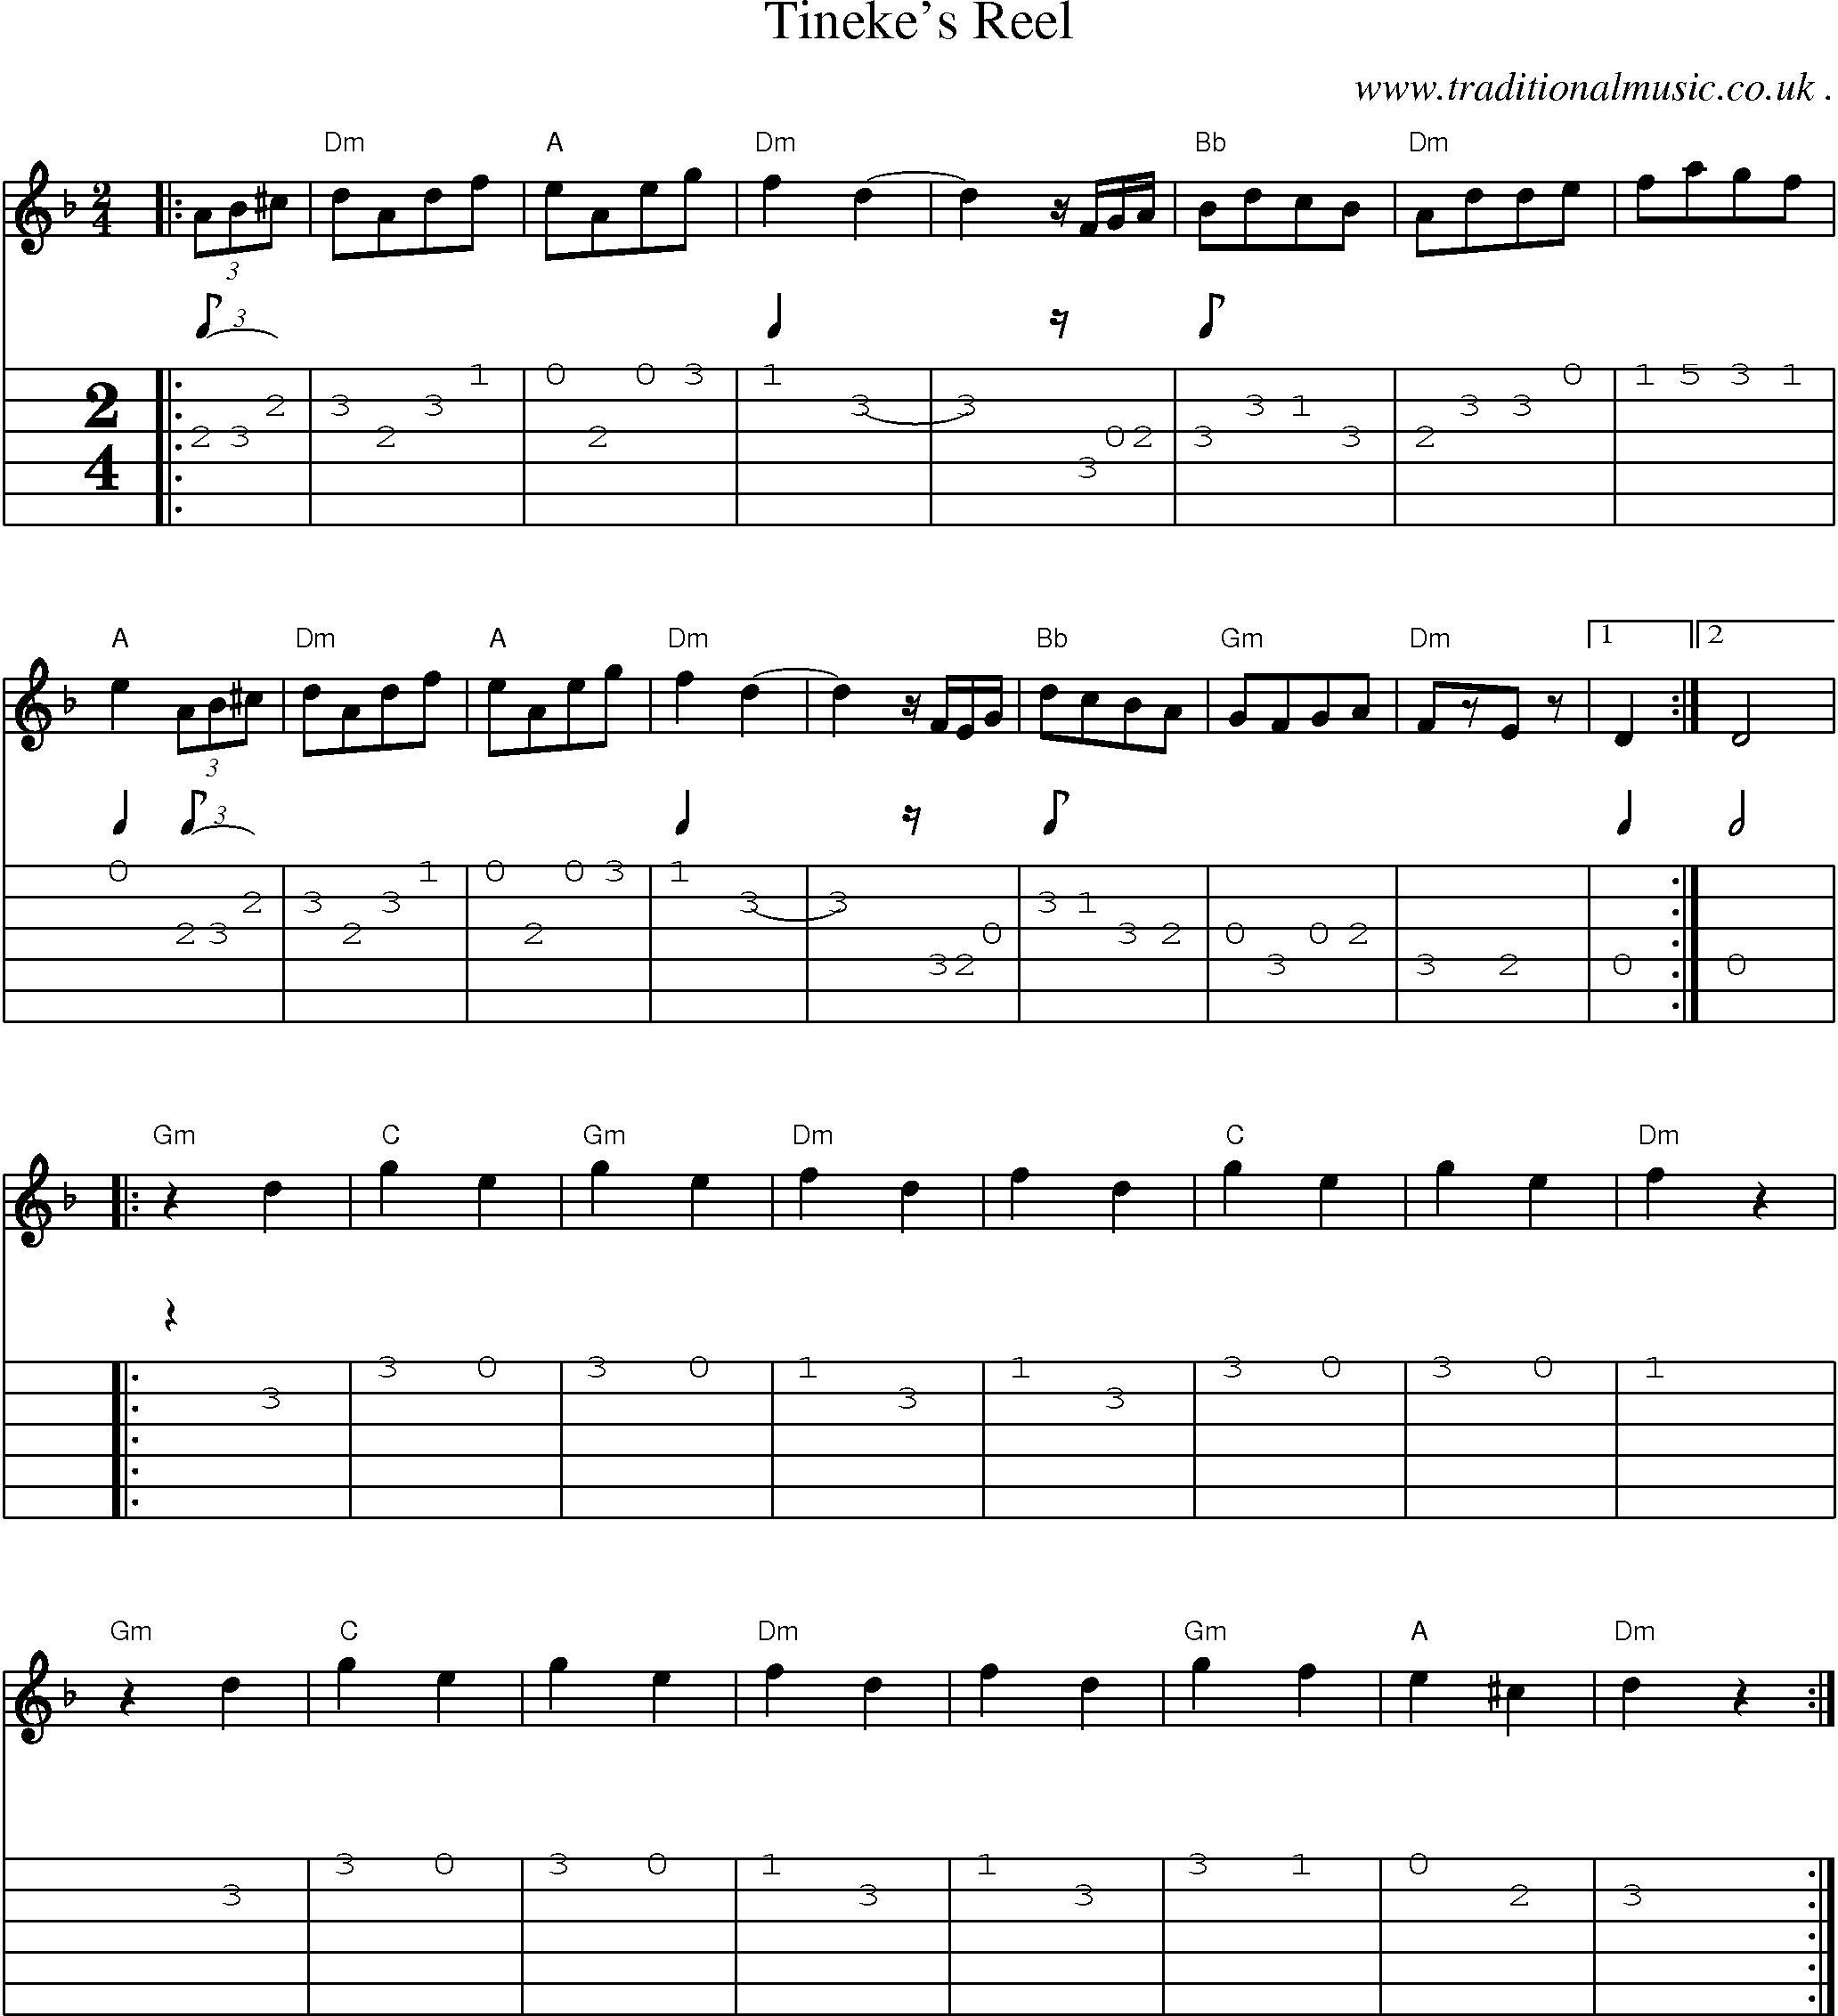 Music Score and Guitar Tabs for Tinekes Reel